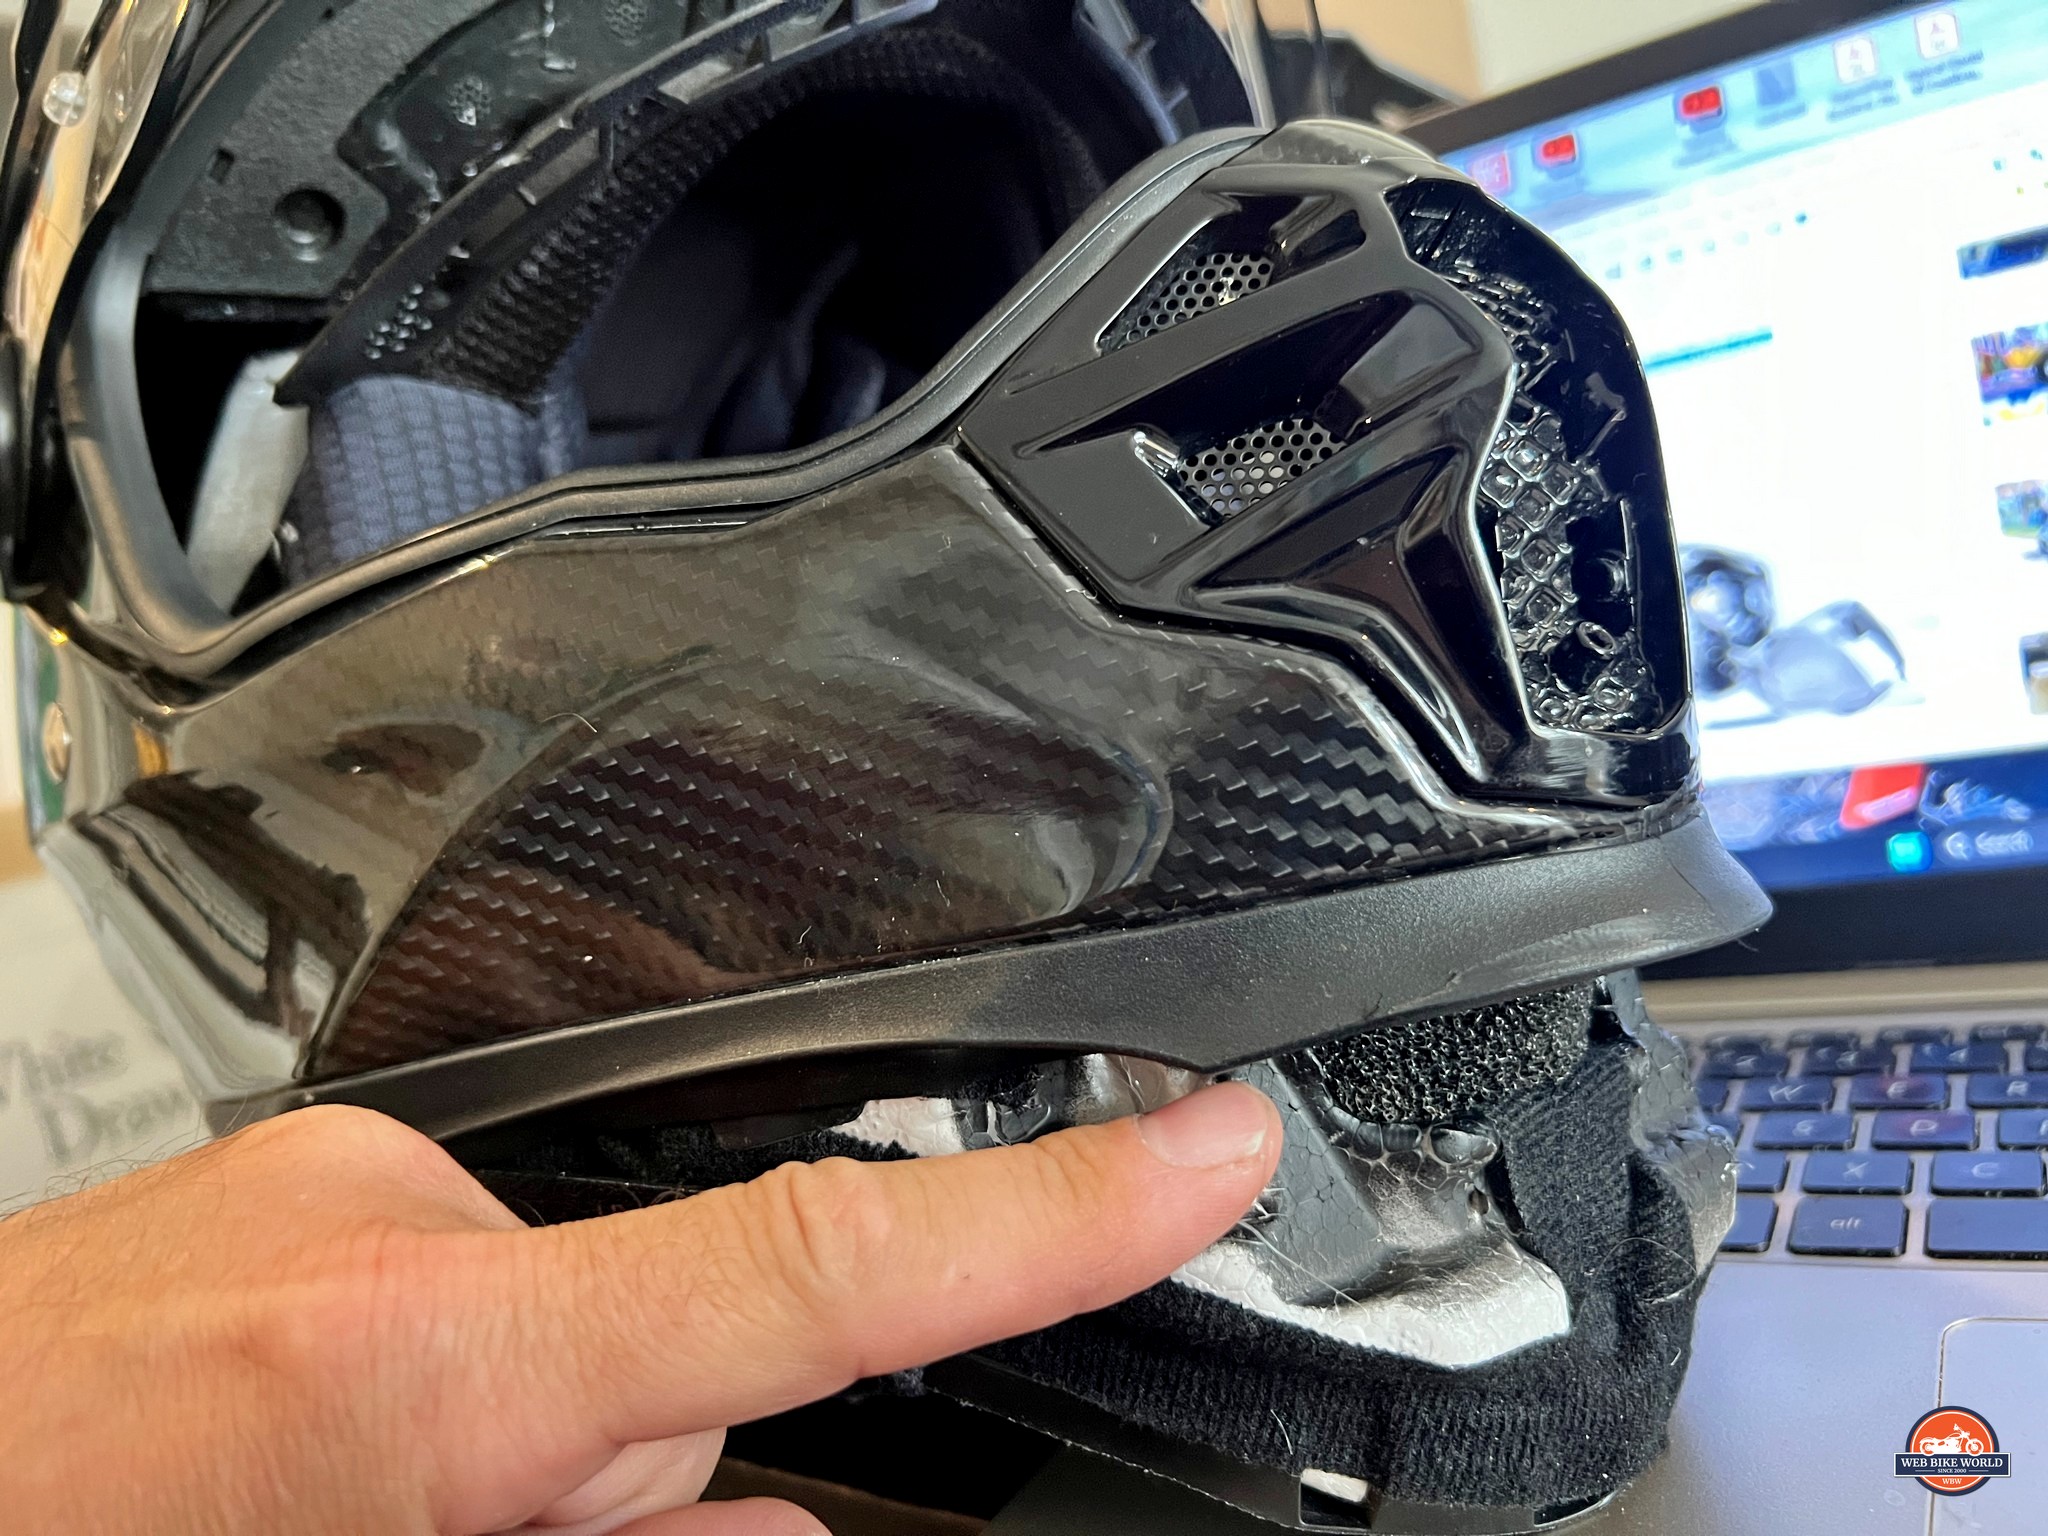 This small foam filter shows how inadequate the chin bar vent size is on the XT9000 helmet.